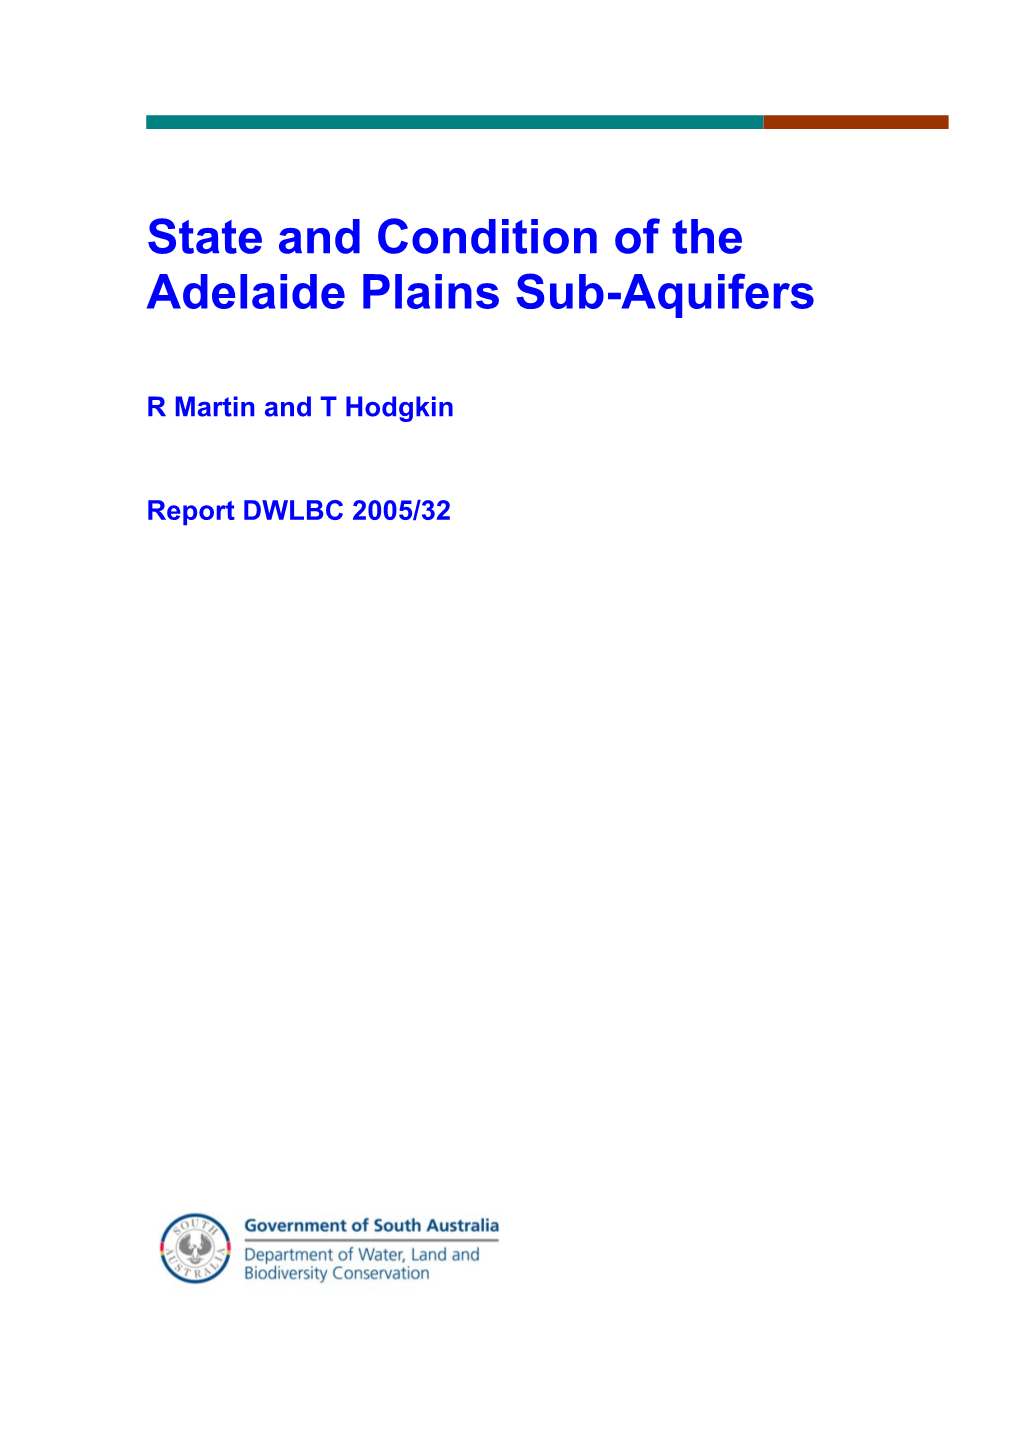 State and Condition of the Adelaide Plains Sub-Aquifers